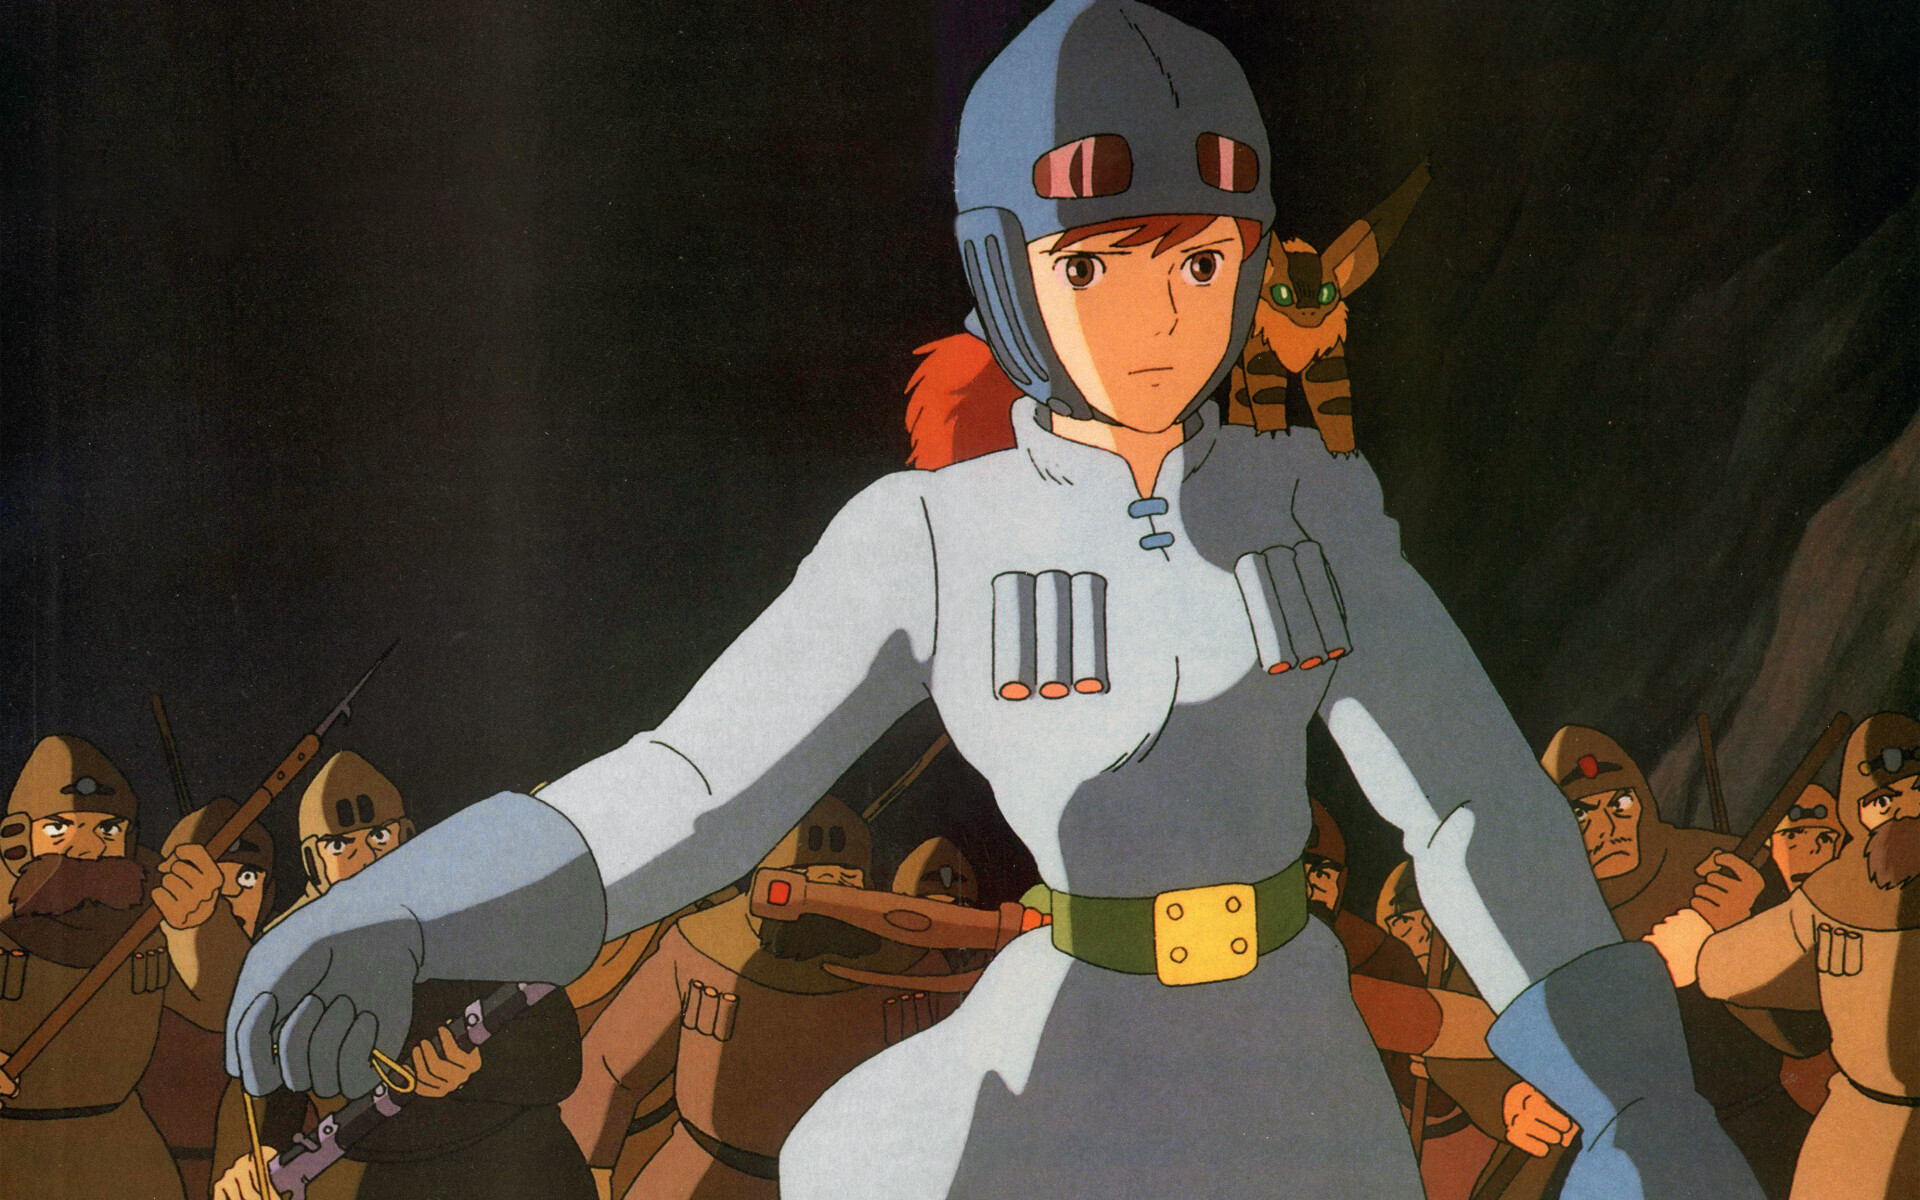 Nausicaa of the Valley of the Wind: Princess, A small corner of a post-apocalyptic world that is dealing with ecological disaster in the form of a toxic jungle that spreads across the land, polluting the air and water. 1920x1200 HD Wallpaper.